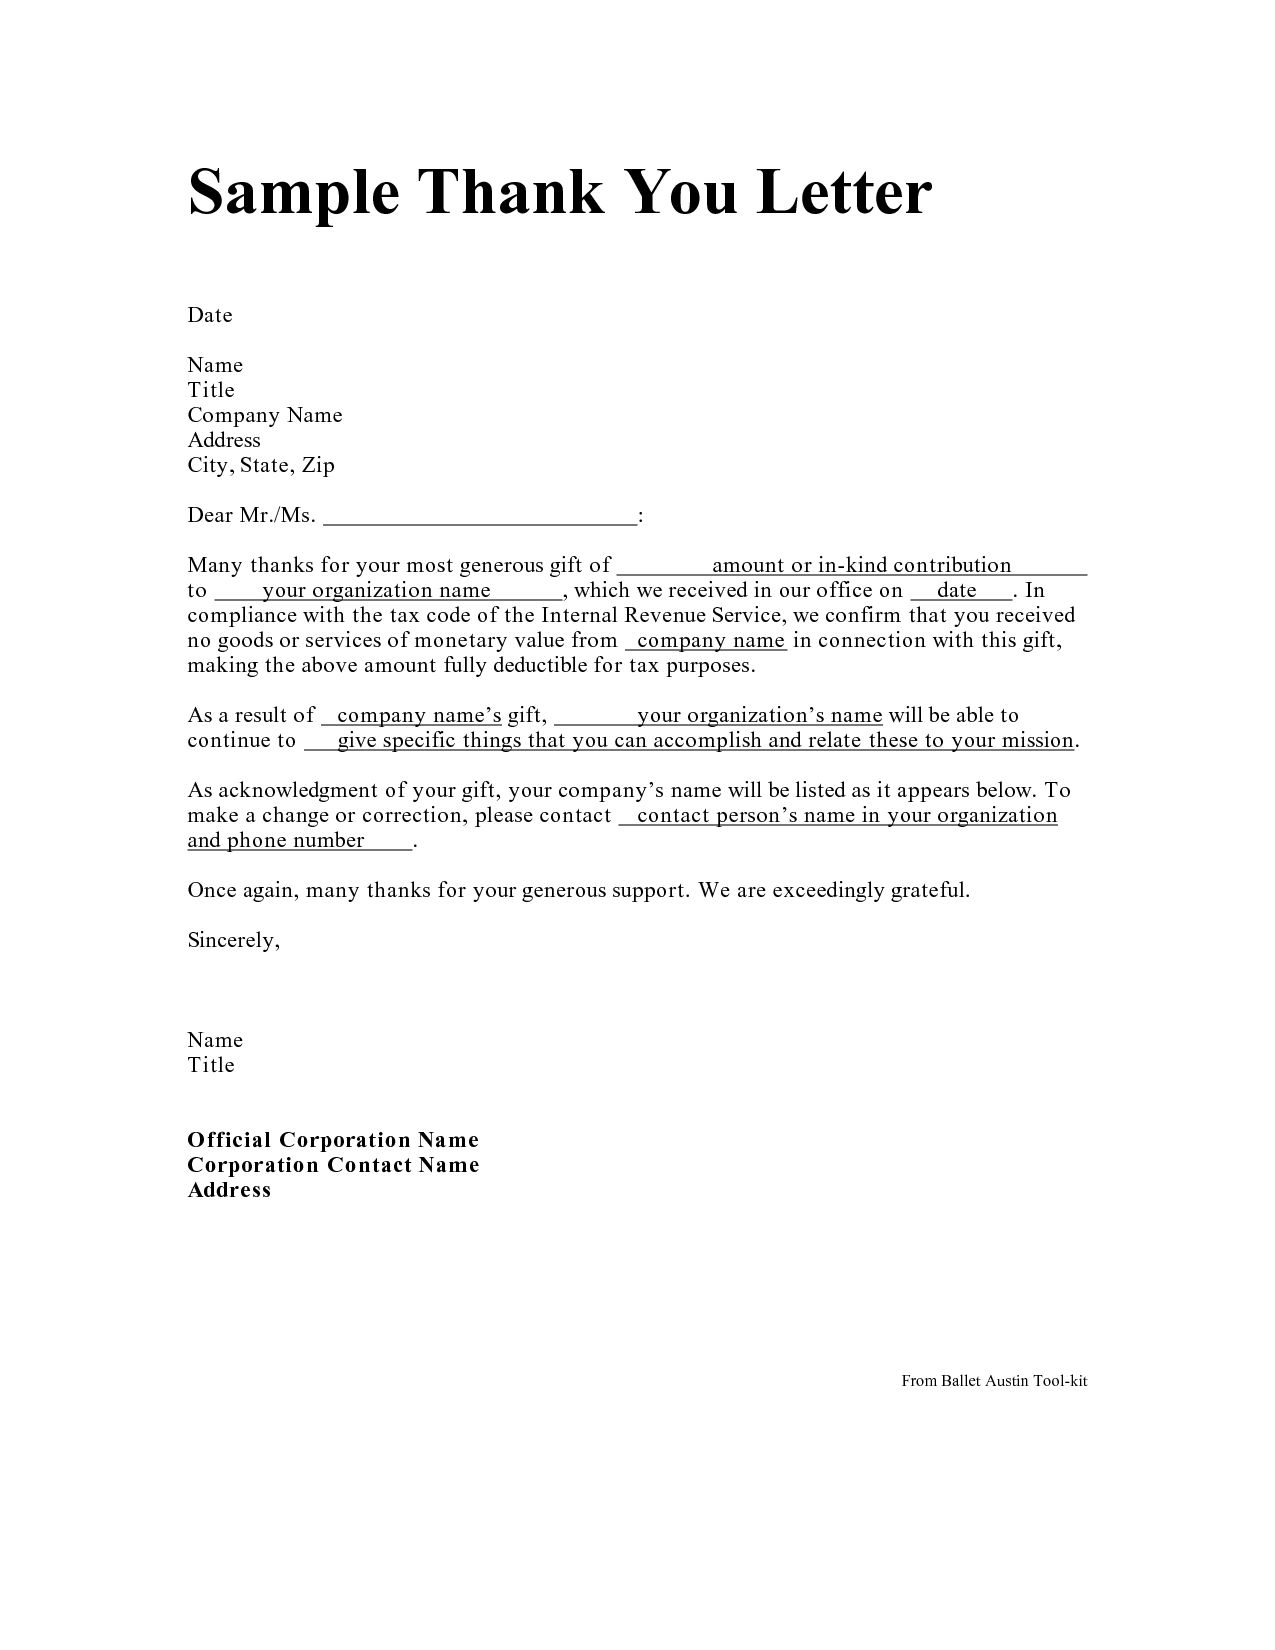 Voe Letter Template - Personal Thank You Letter Personal Thank You Letter Samples